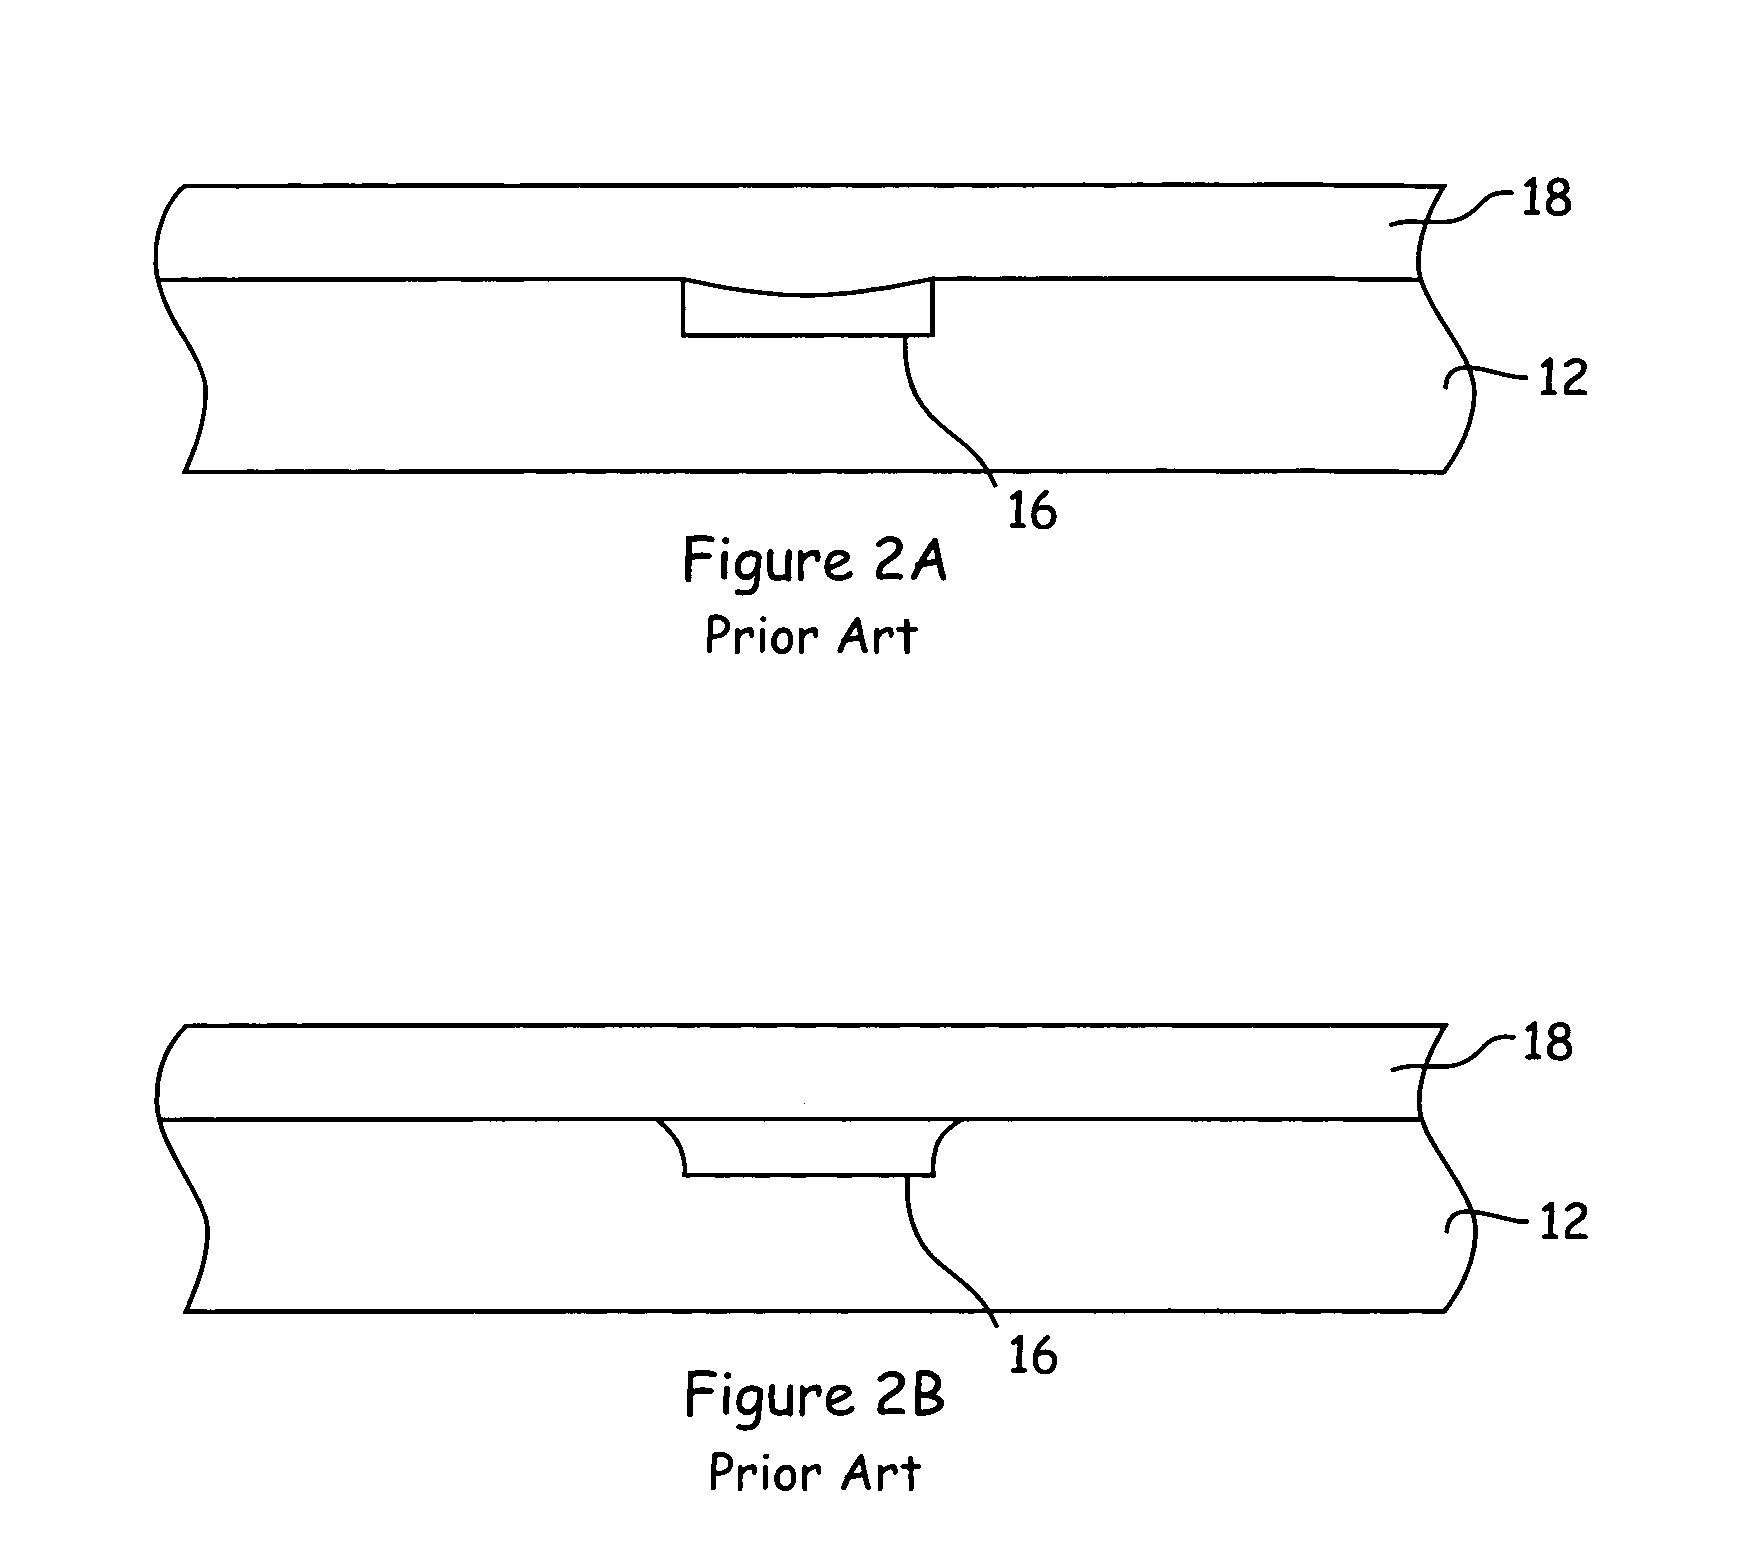 Methods of fabricating polymeric structures incorporating microscale fluidic elements